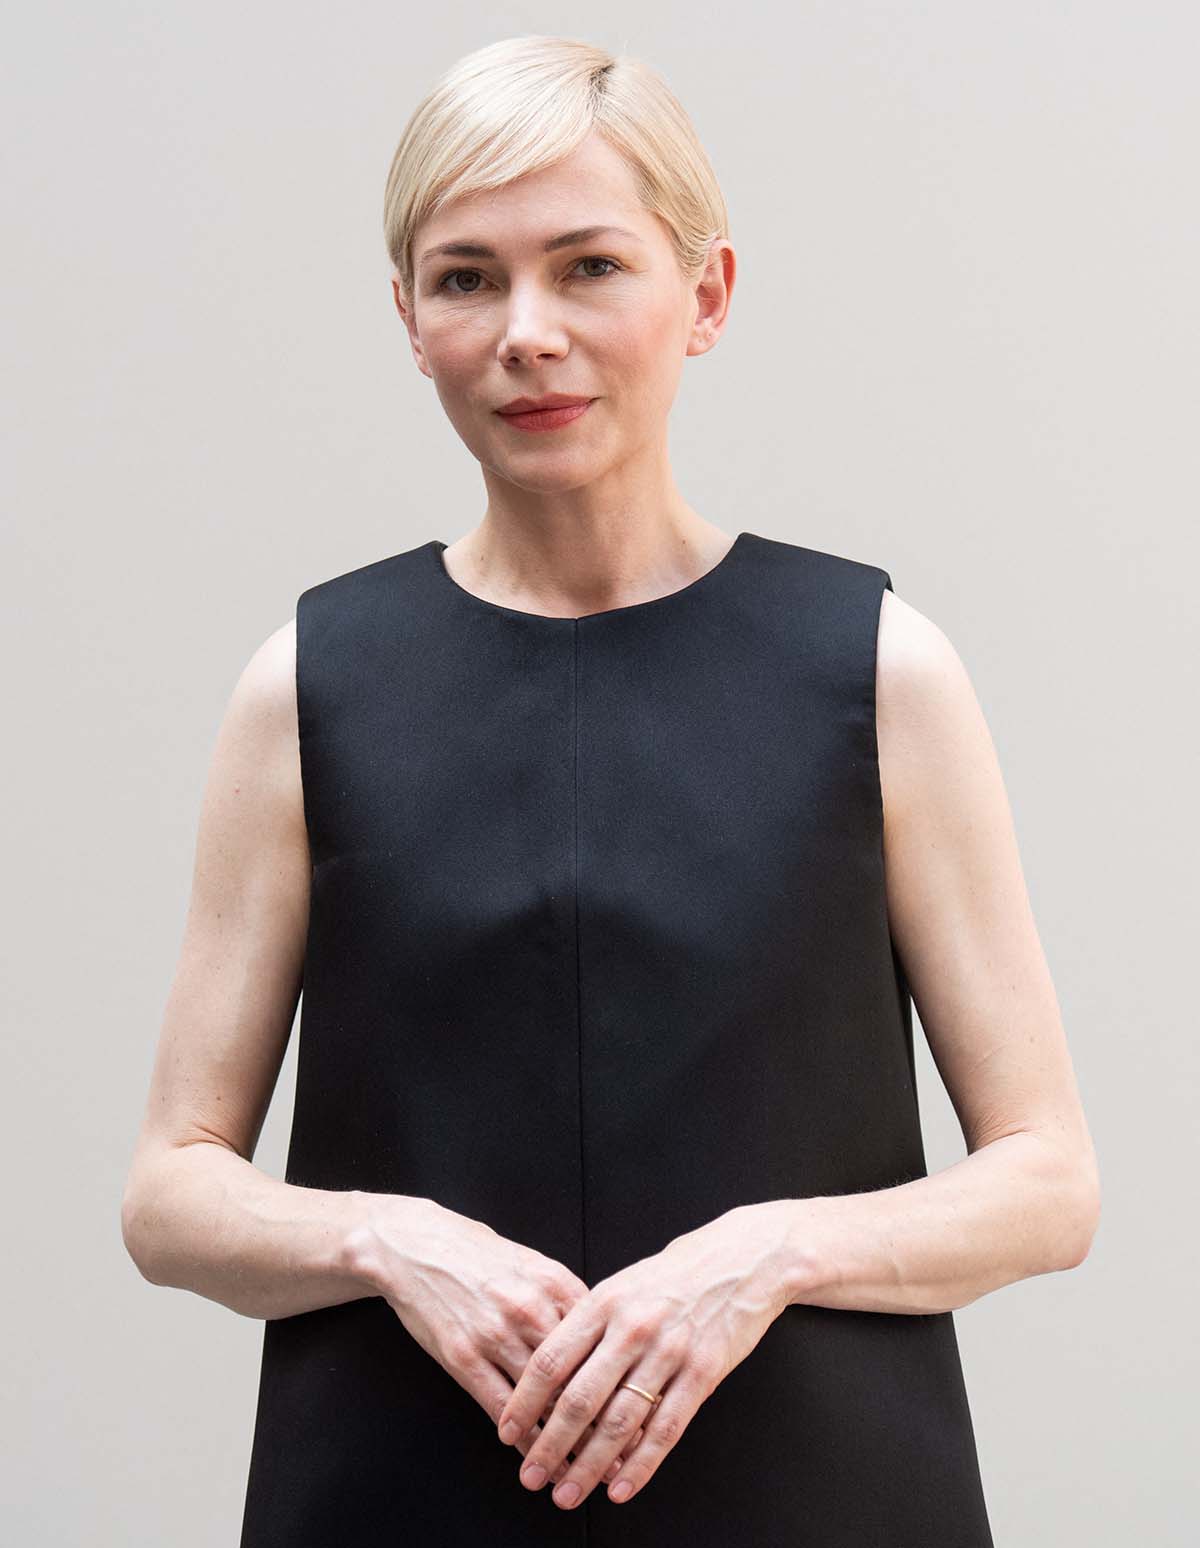 Michelle Williams steps out without jewelry, sports her blonde pixie, and wears minimal soft pink makeup